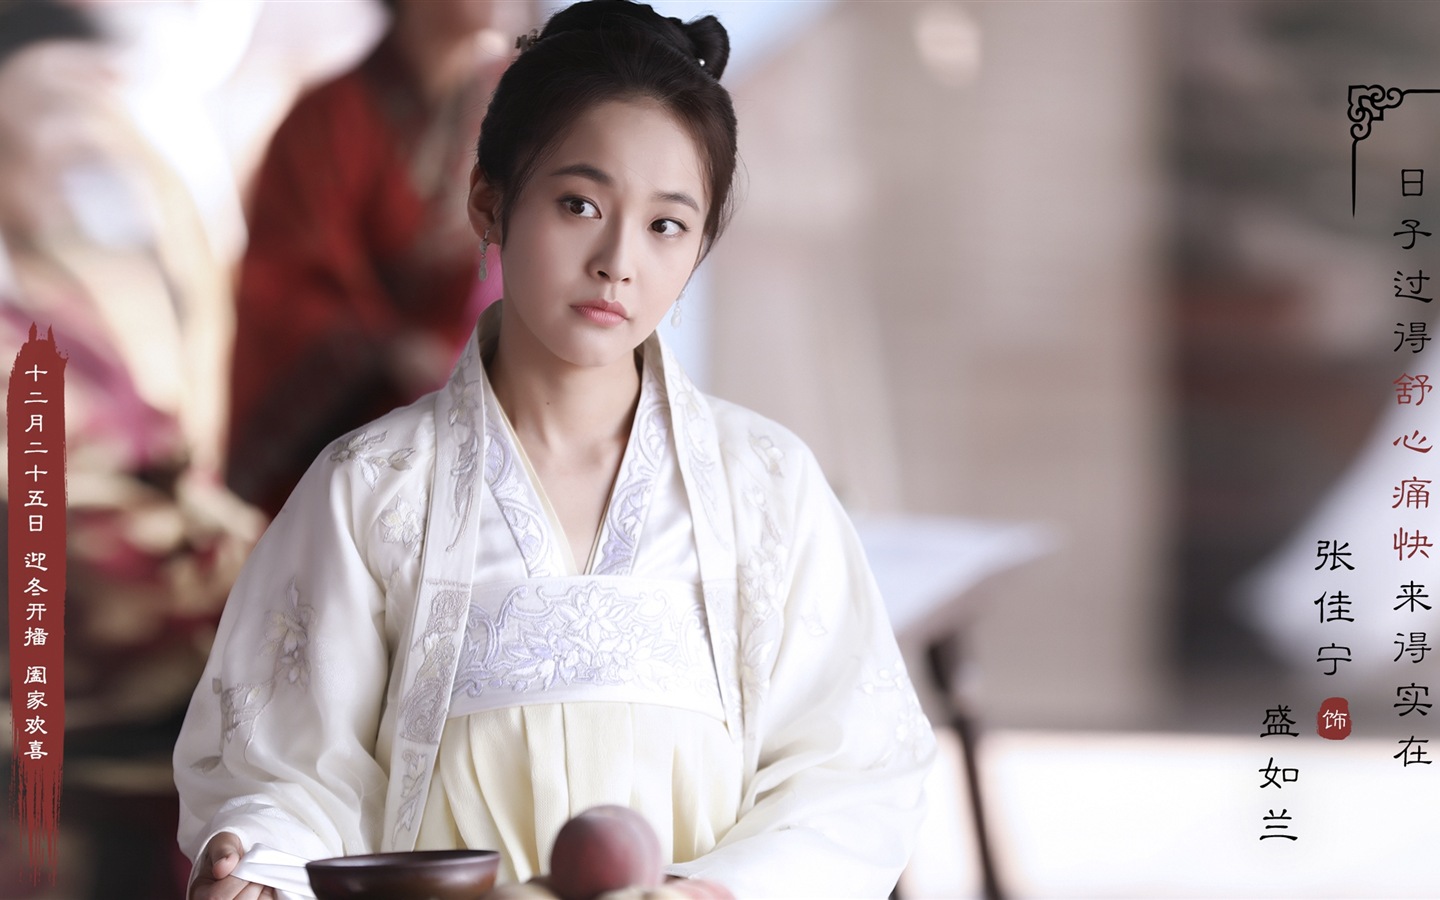 The Story Of MingLan, TV series HD wallpapers #33 - 1440x900